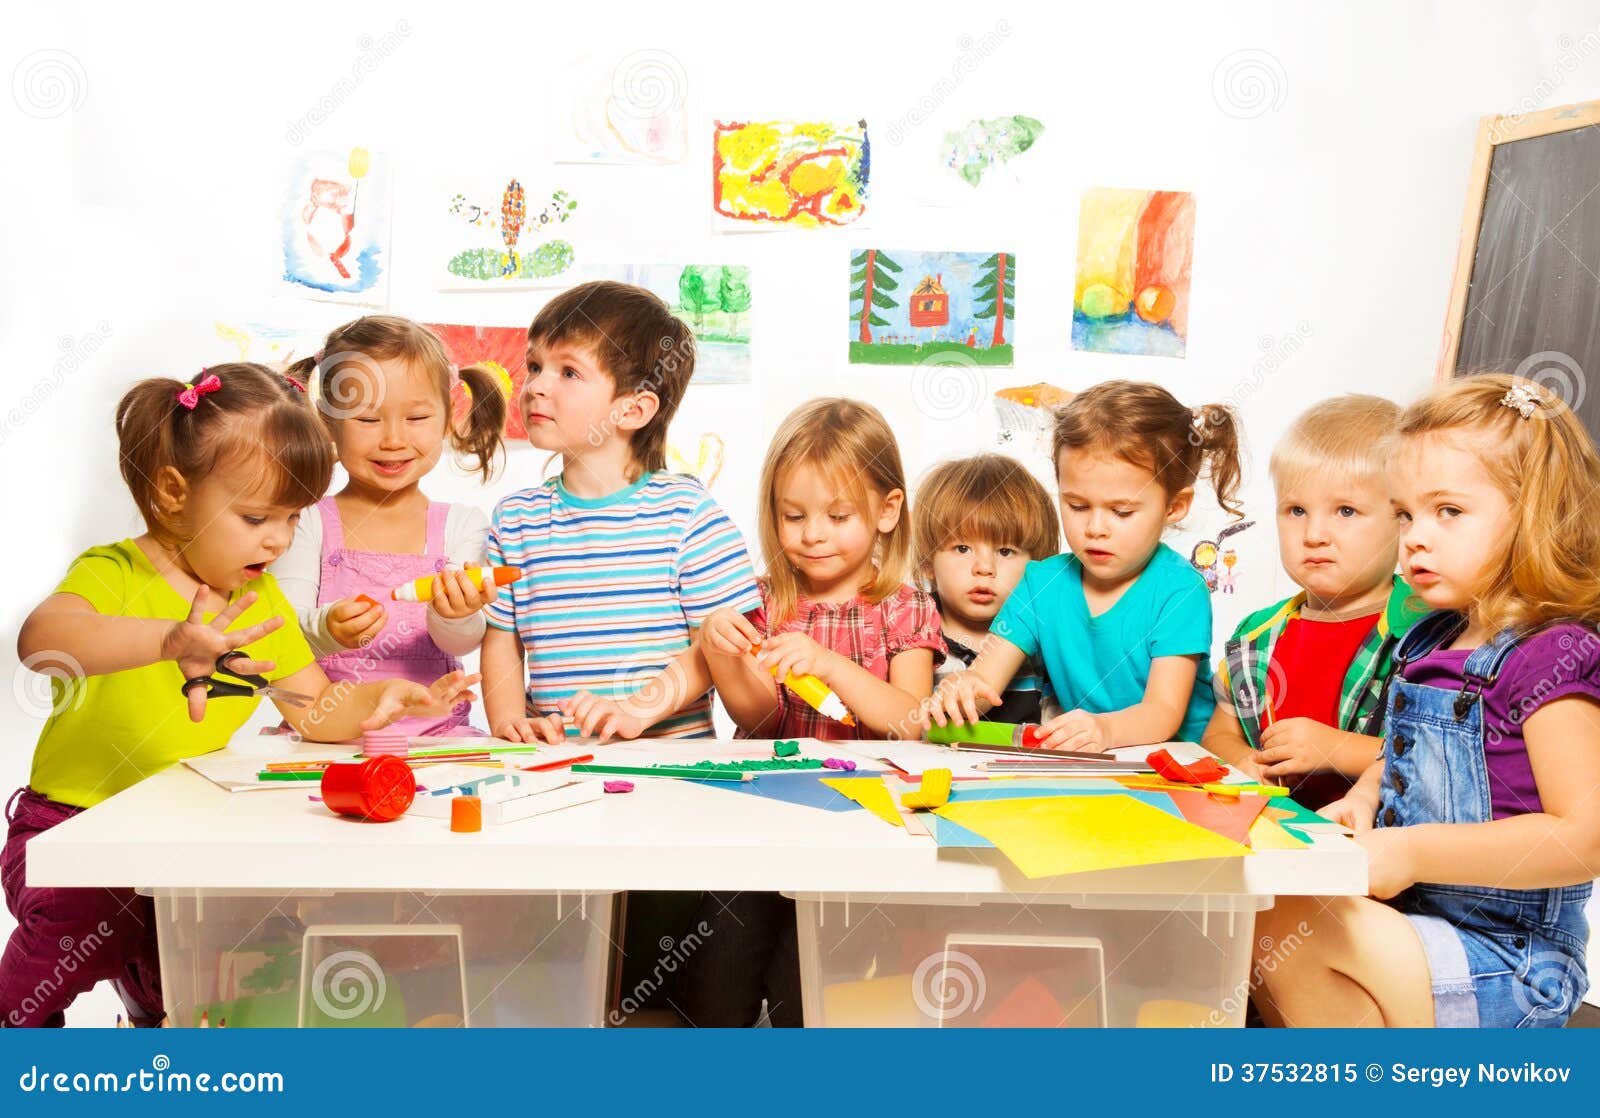 Many Kids Drawing And Gluing Stock Image - Image of paint ...